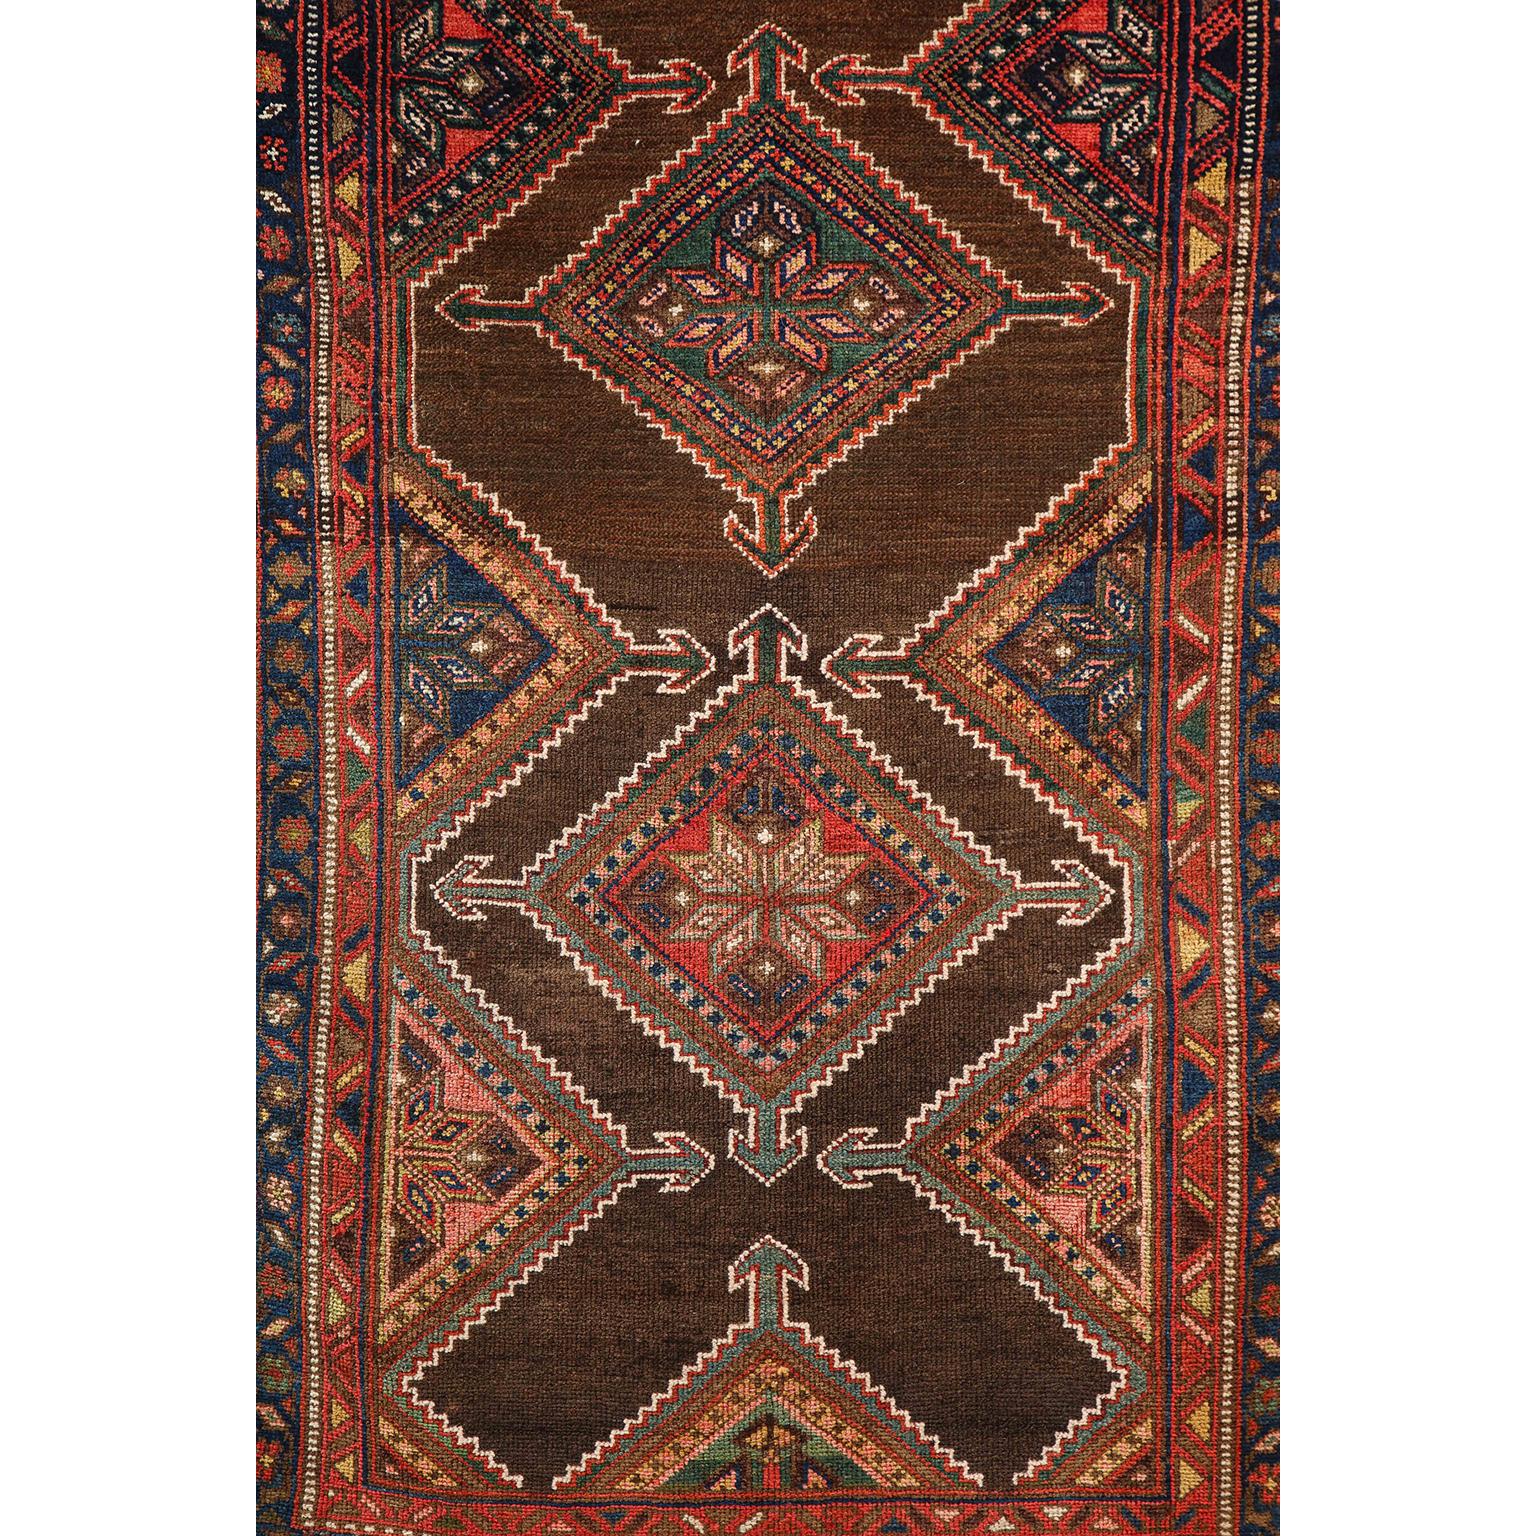 This antique Persian Seraband carpet in pure wool and vegetable dyes circa 1900 features a central mirrored band design with intricately detailed and layered borders. Hand knotted in pure handspun wool upon a woolen warp and weft, its organic design